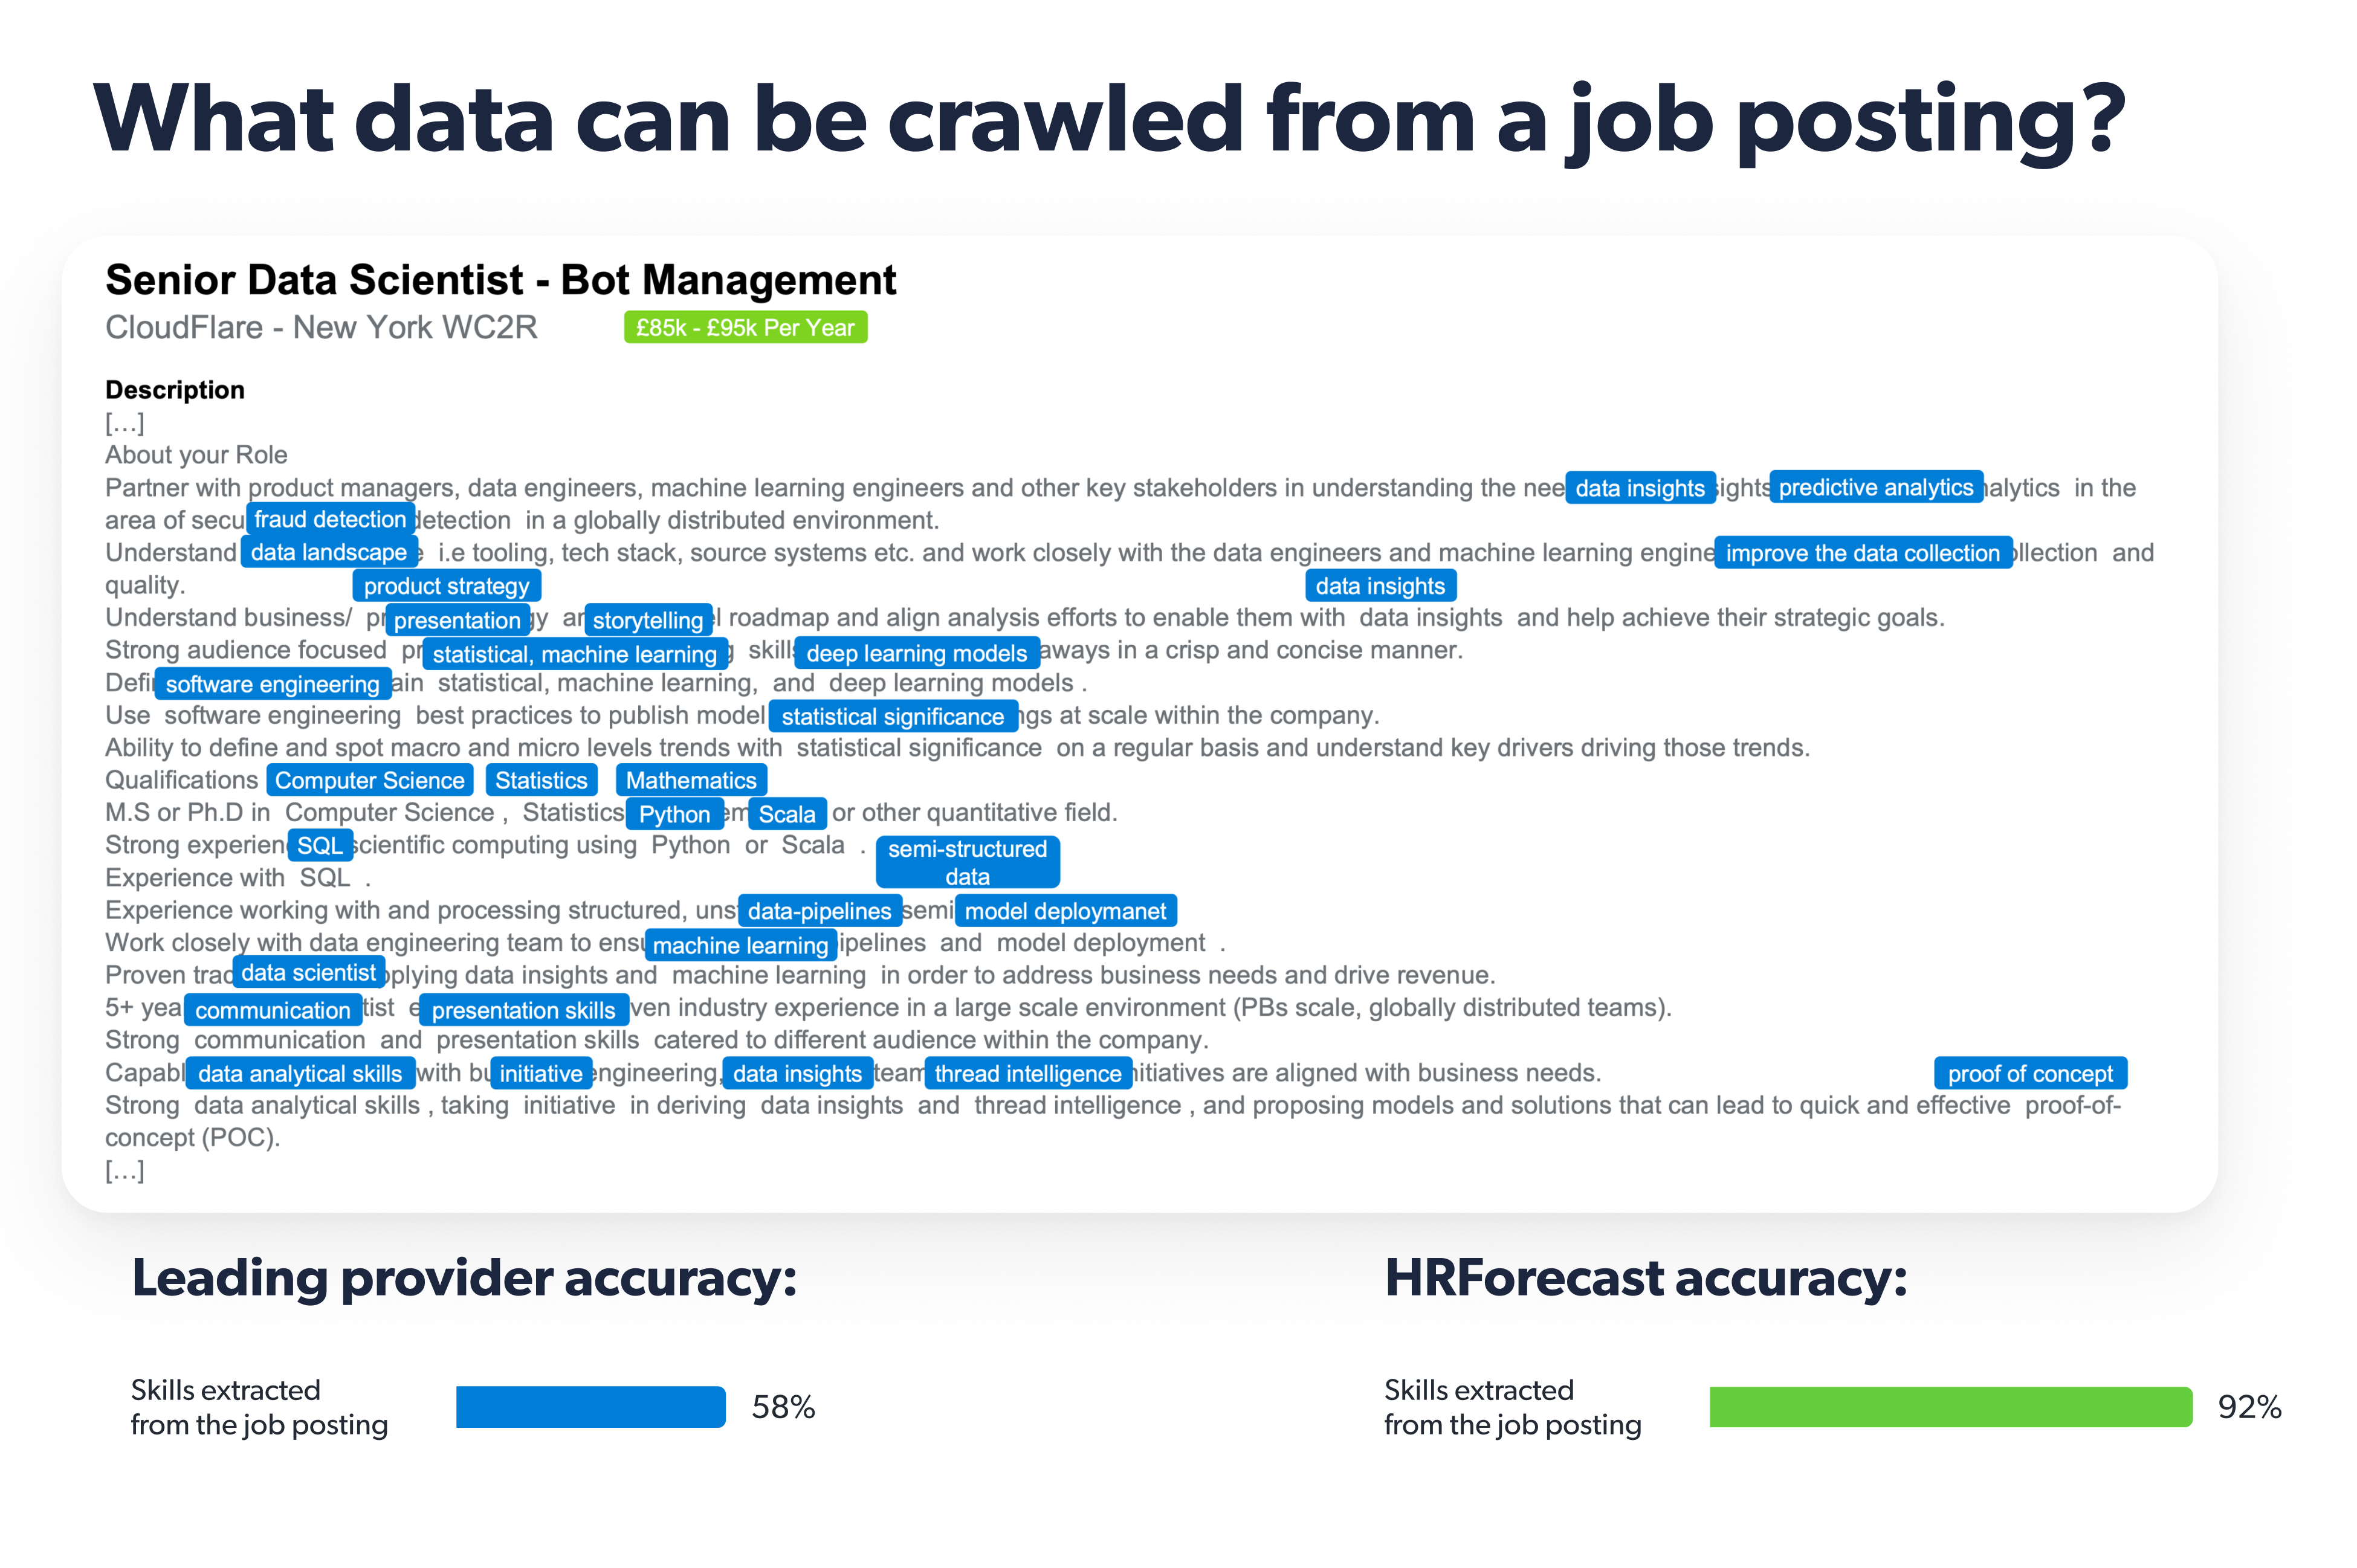 What data can be crawled from a job posting?